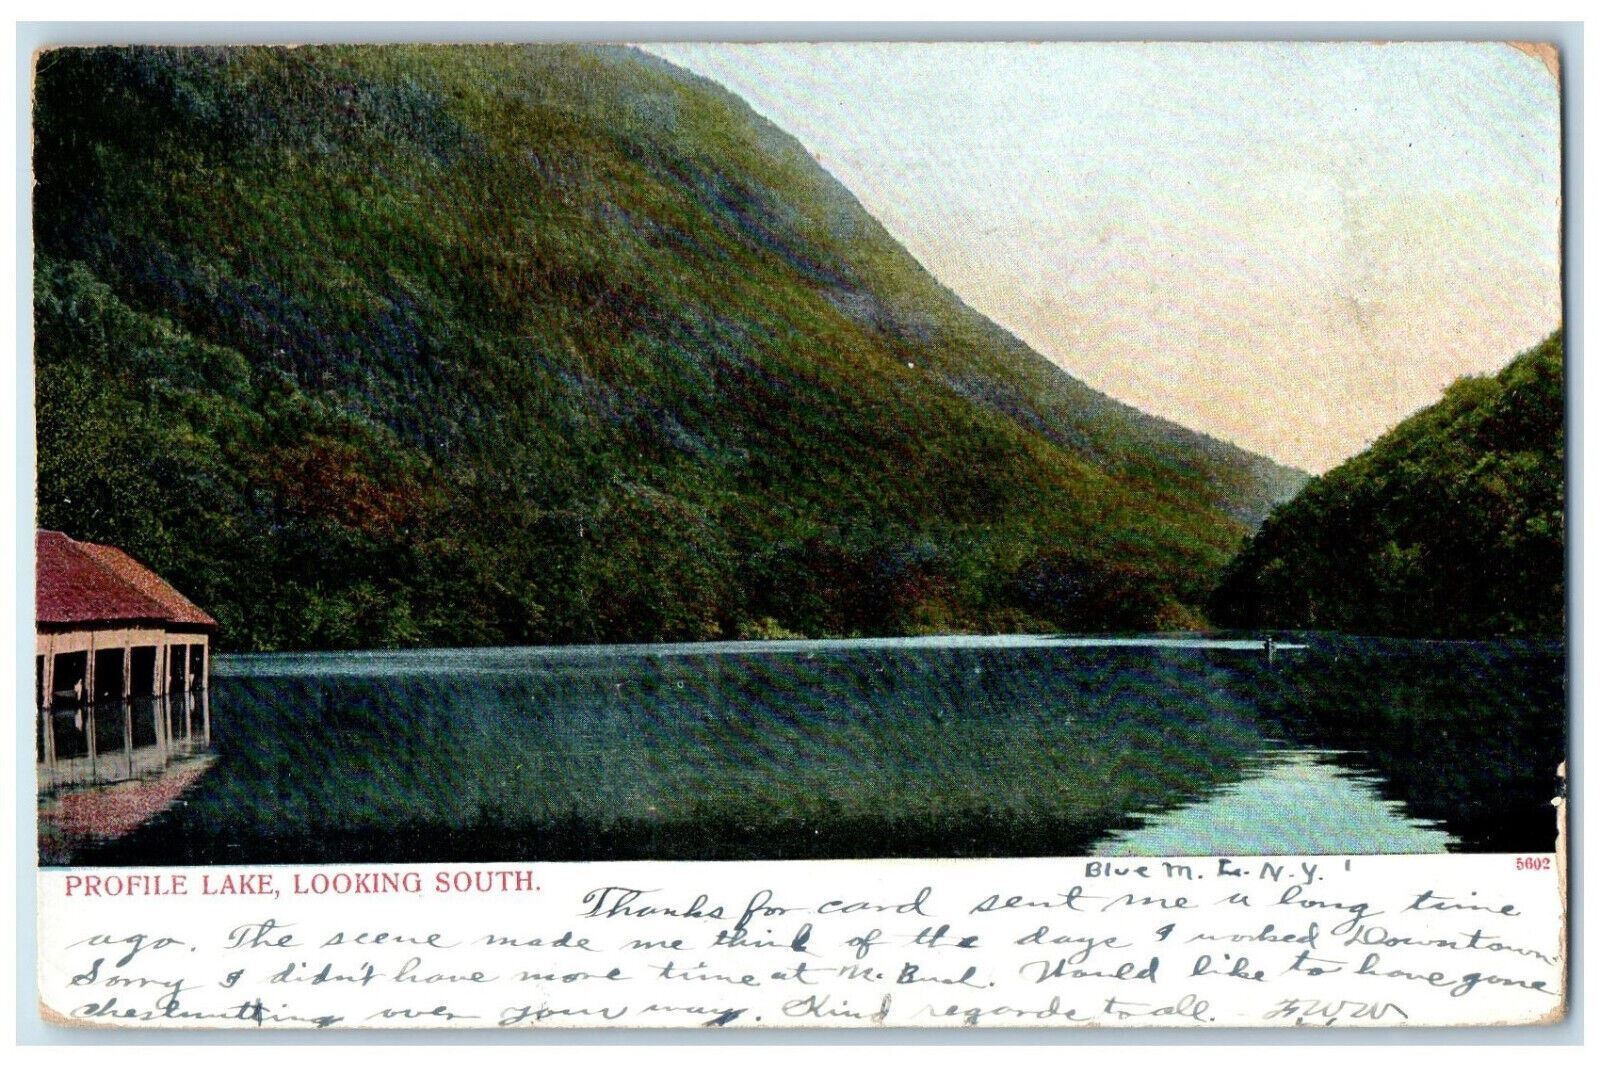 1910 Scene of Mountain, River, Profile Lake Looking South New York NY Postcard